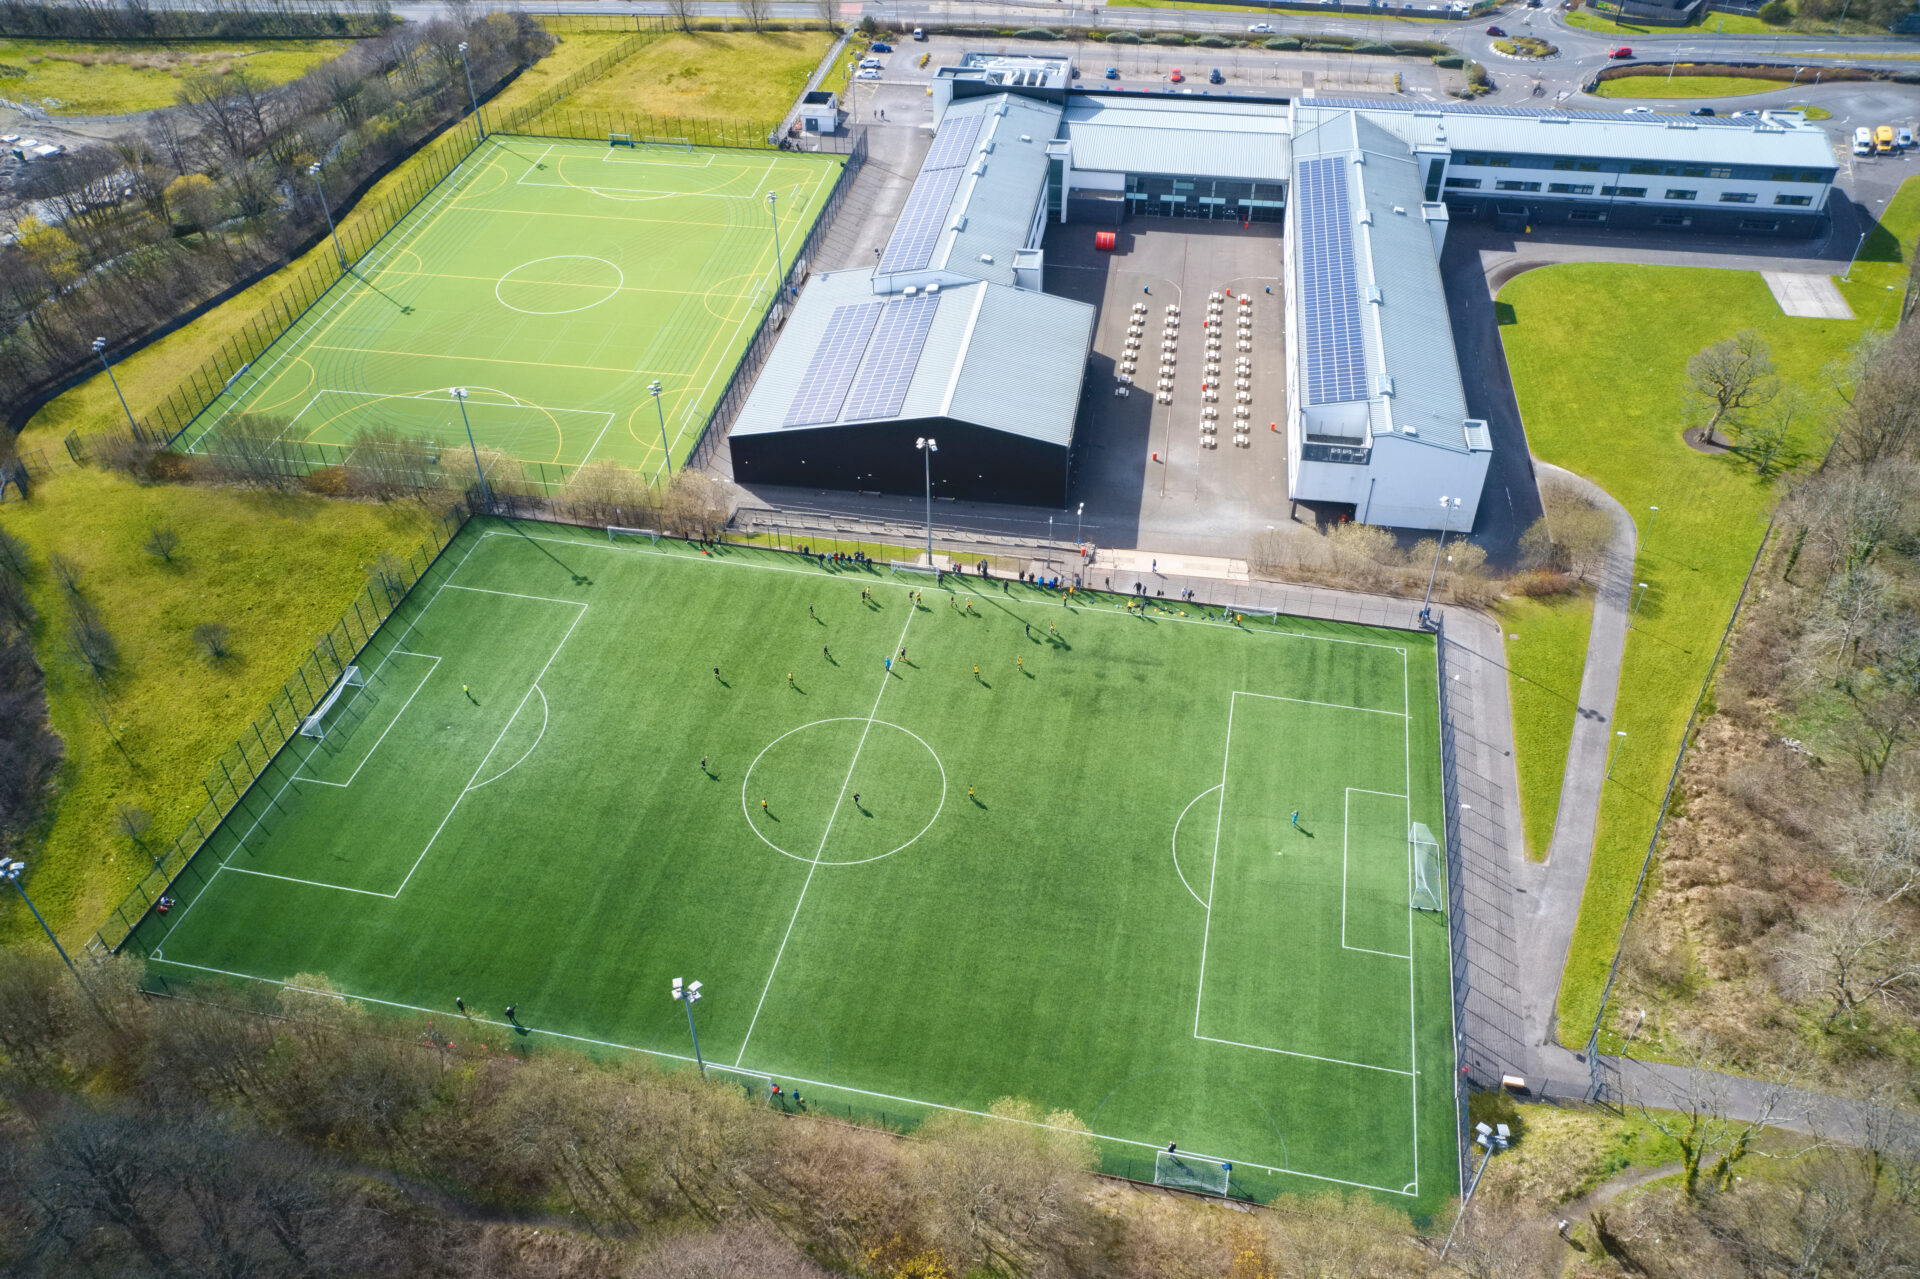 Leisure - Football pitch and sports centre aerial view in Helensburgh